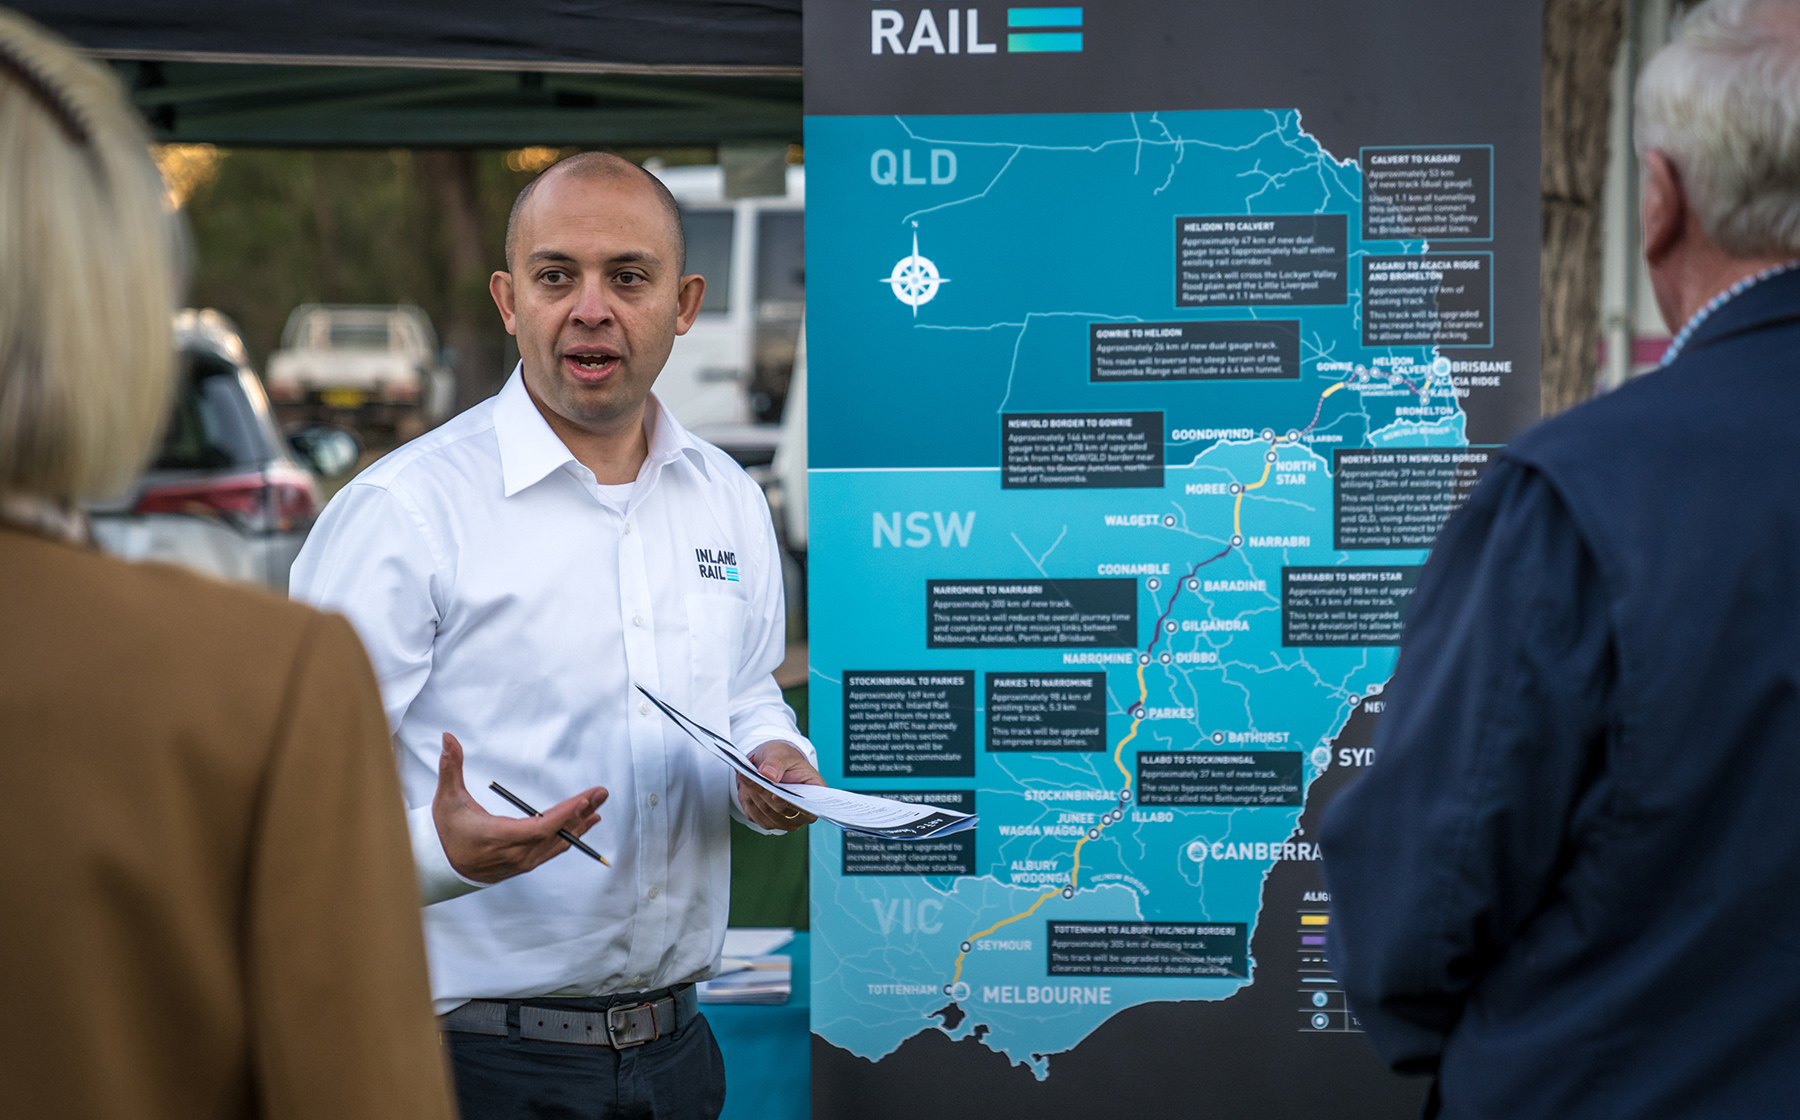 A man standing in front of a map of Inland Rail talking to two people